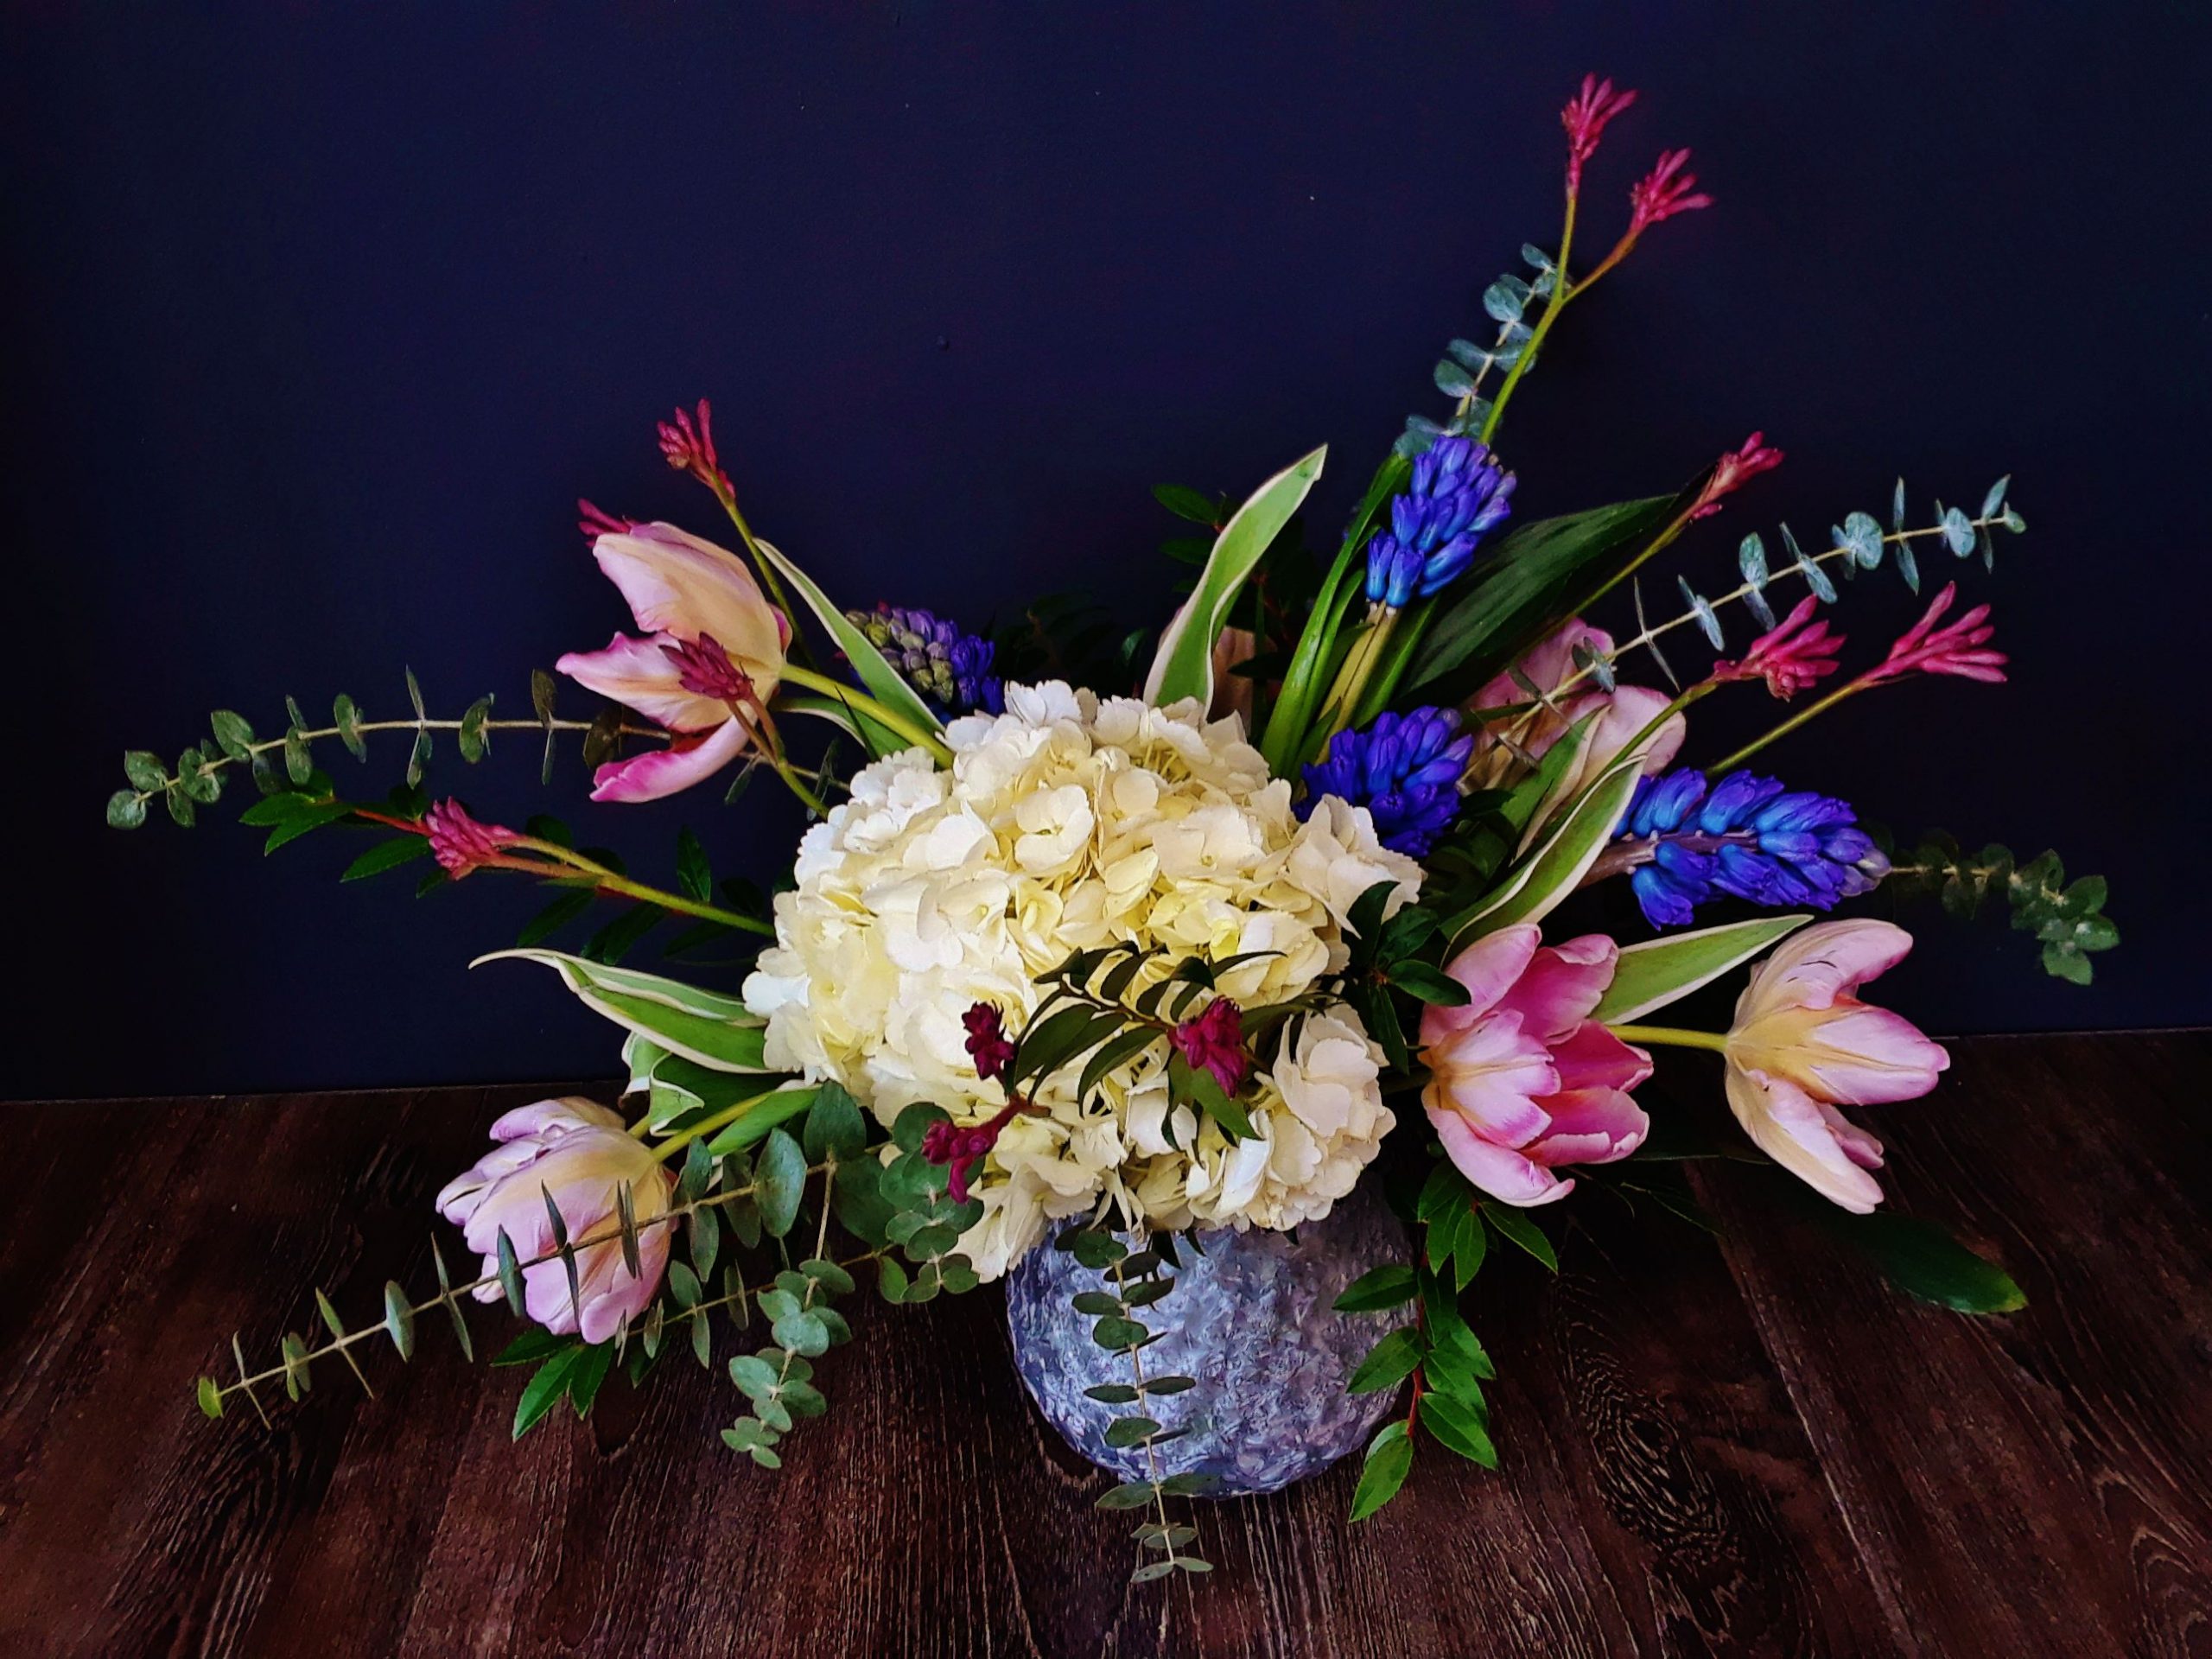 Thumbnail image for: 5 Tips for Creating a Floral Masterpiece